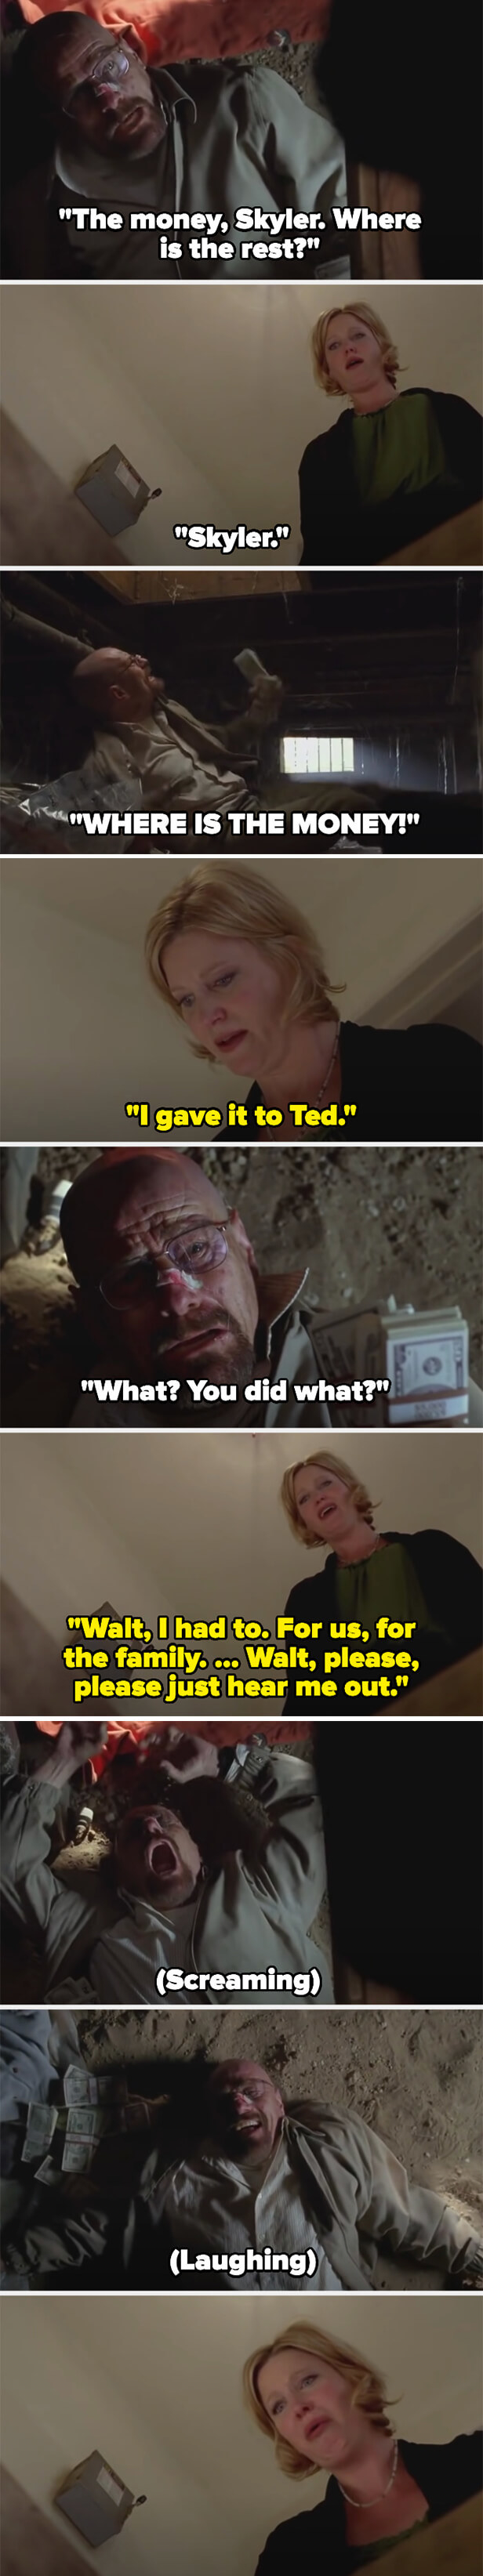 Walt (in the crawl space) asks Skyler where the money is, and she admits she gave it to Ted, begging Walt to let her explain. Walt screams then starts laughing as Skyler looks on in horror